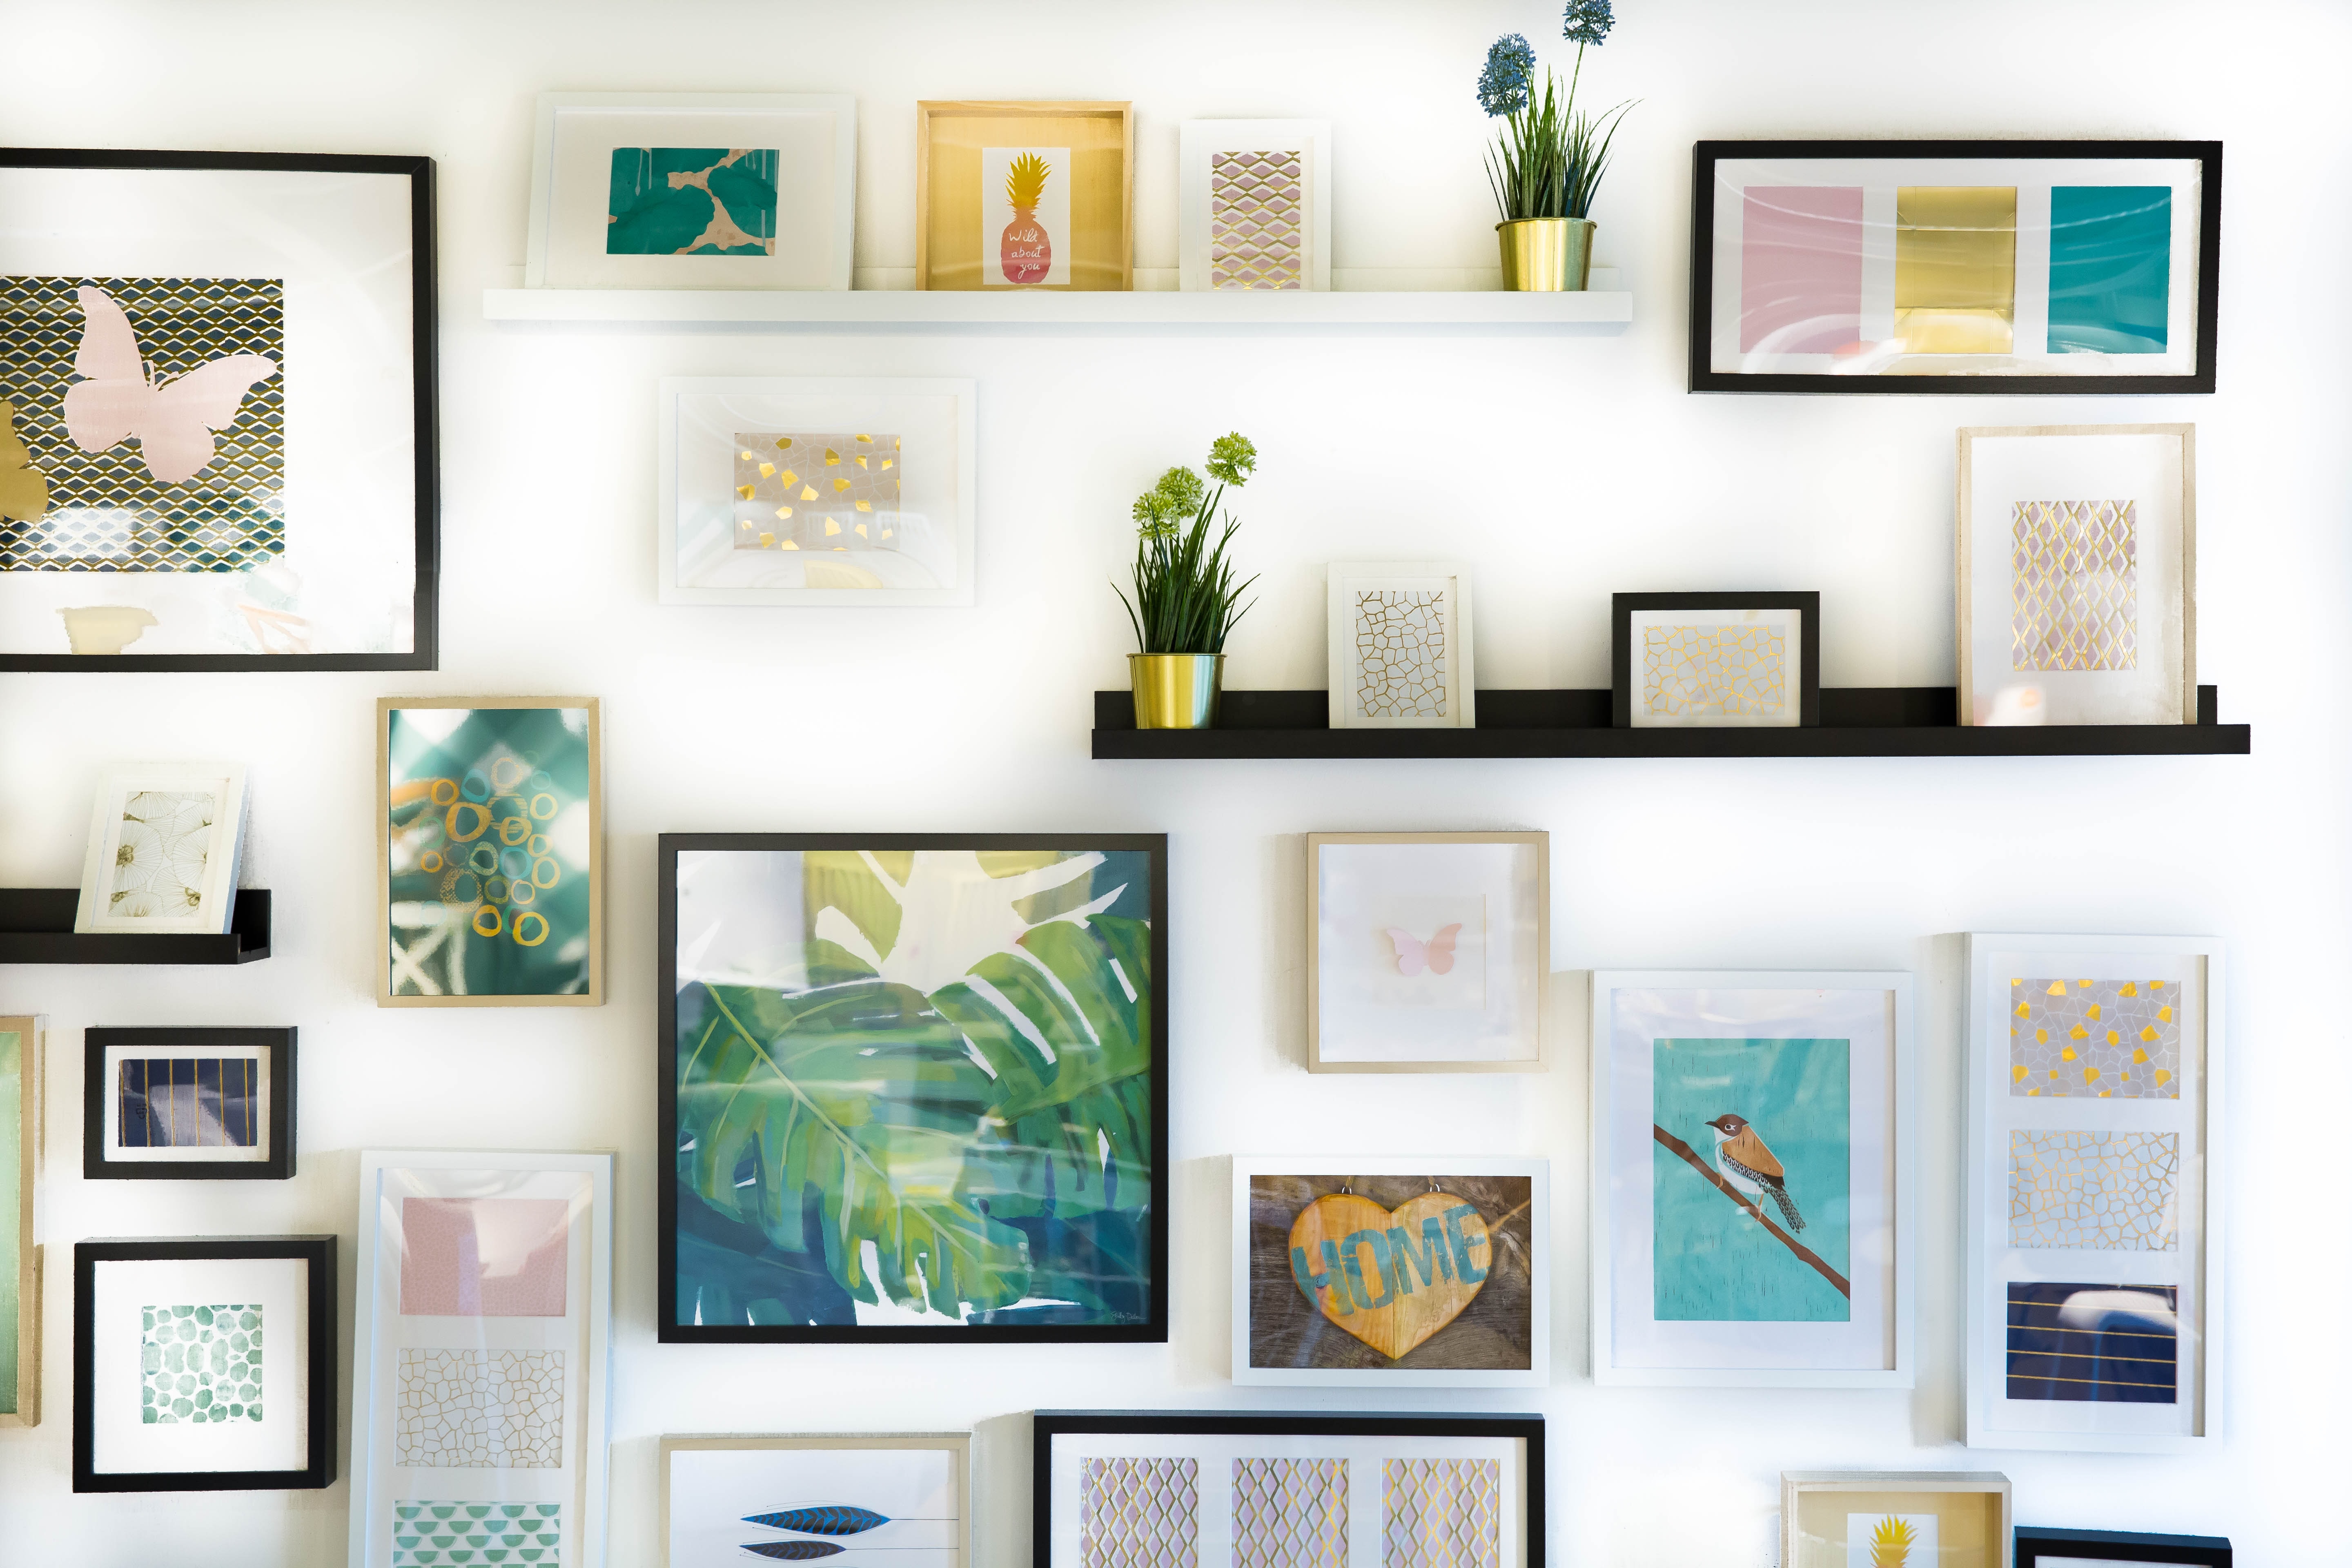 The Perfect Housewarming Gifts – Bookblock’s Advice